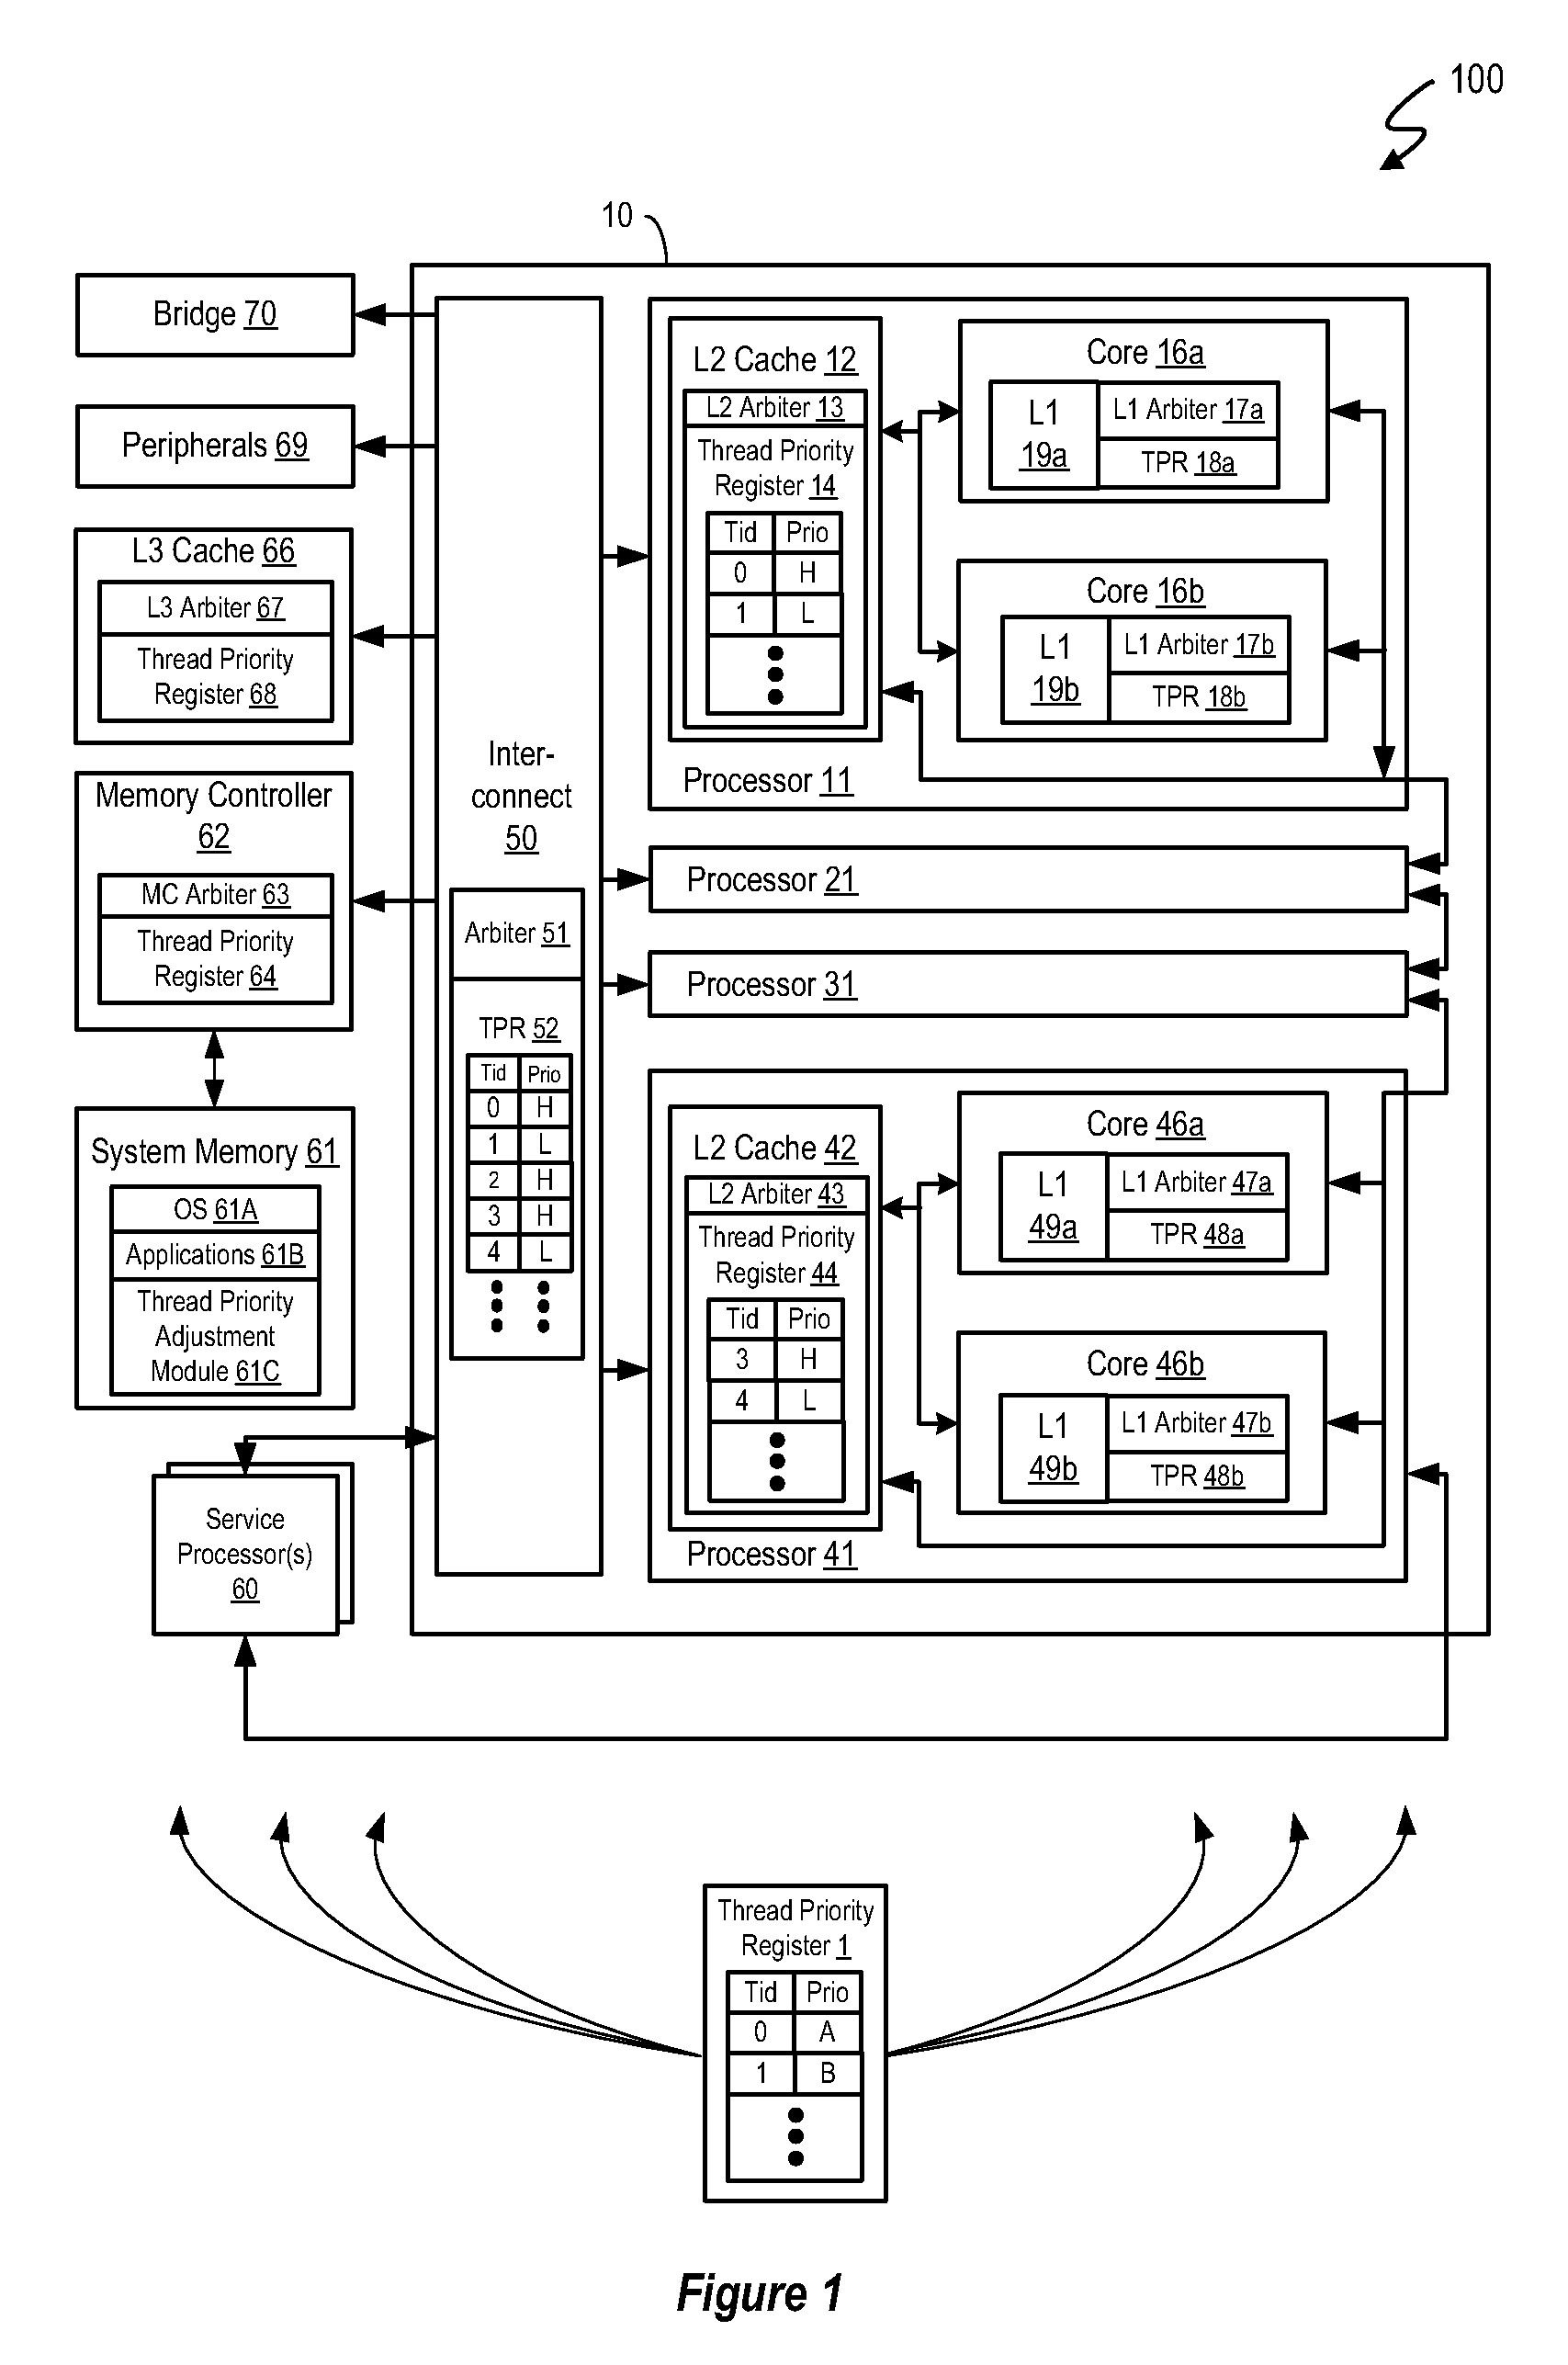 Dynamic instruction execution using distributed transaction priority registers